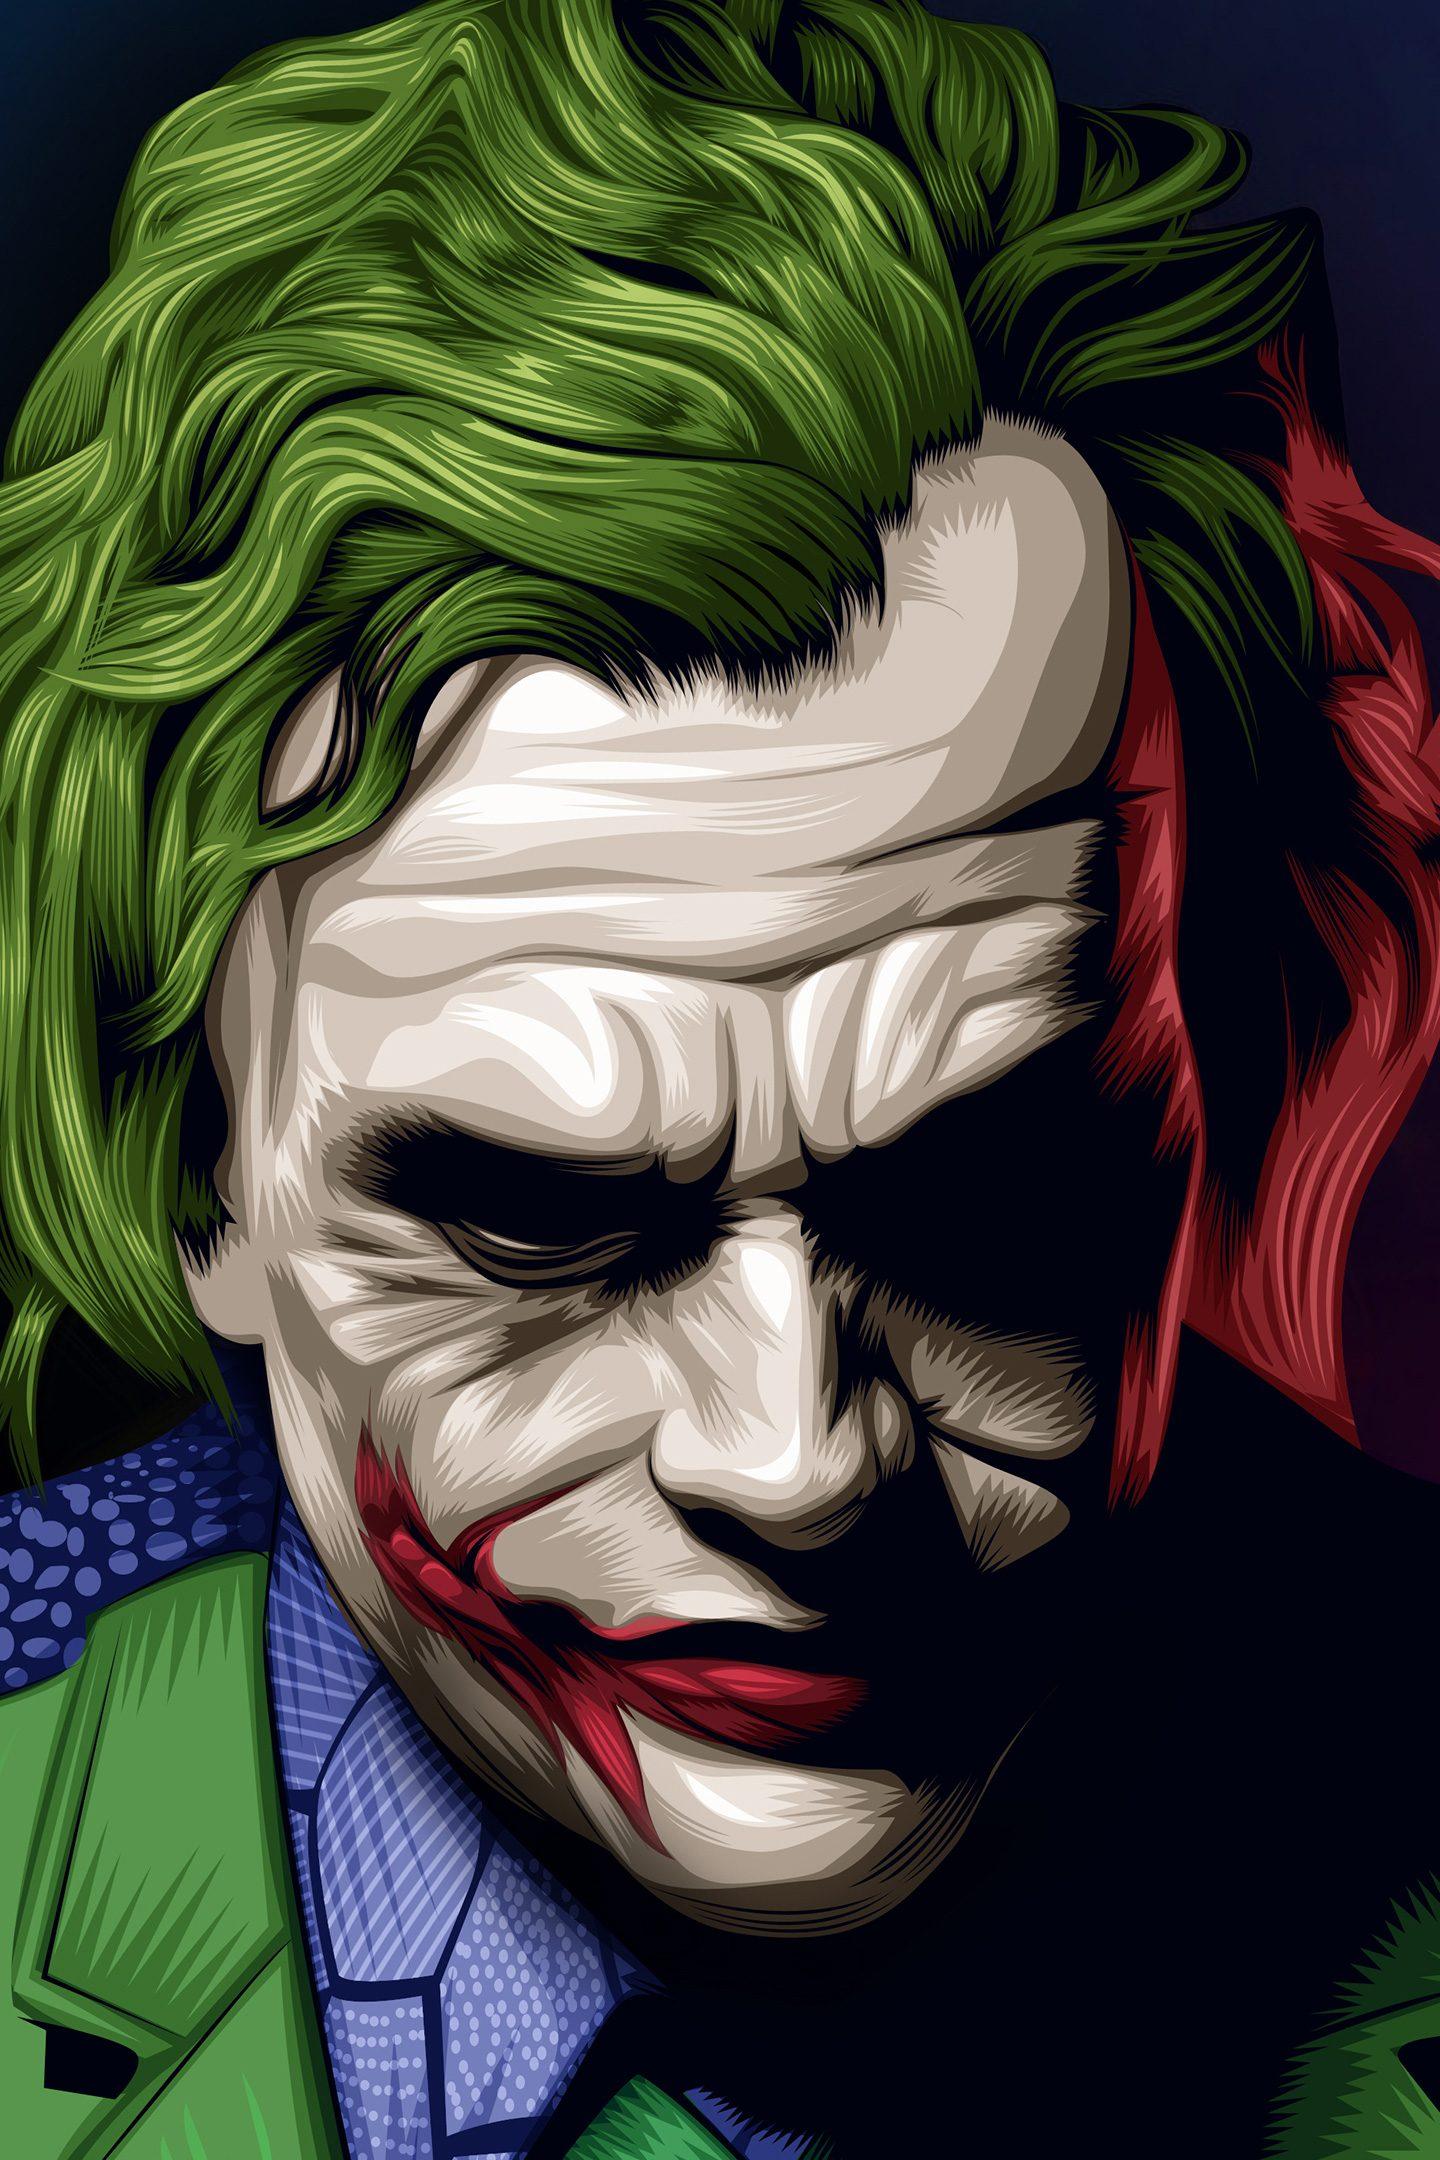 Download Hd Wallpapers Of Joker For Mobile